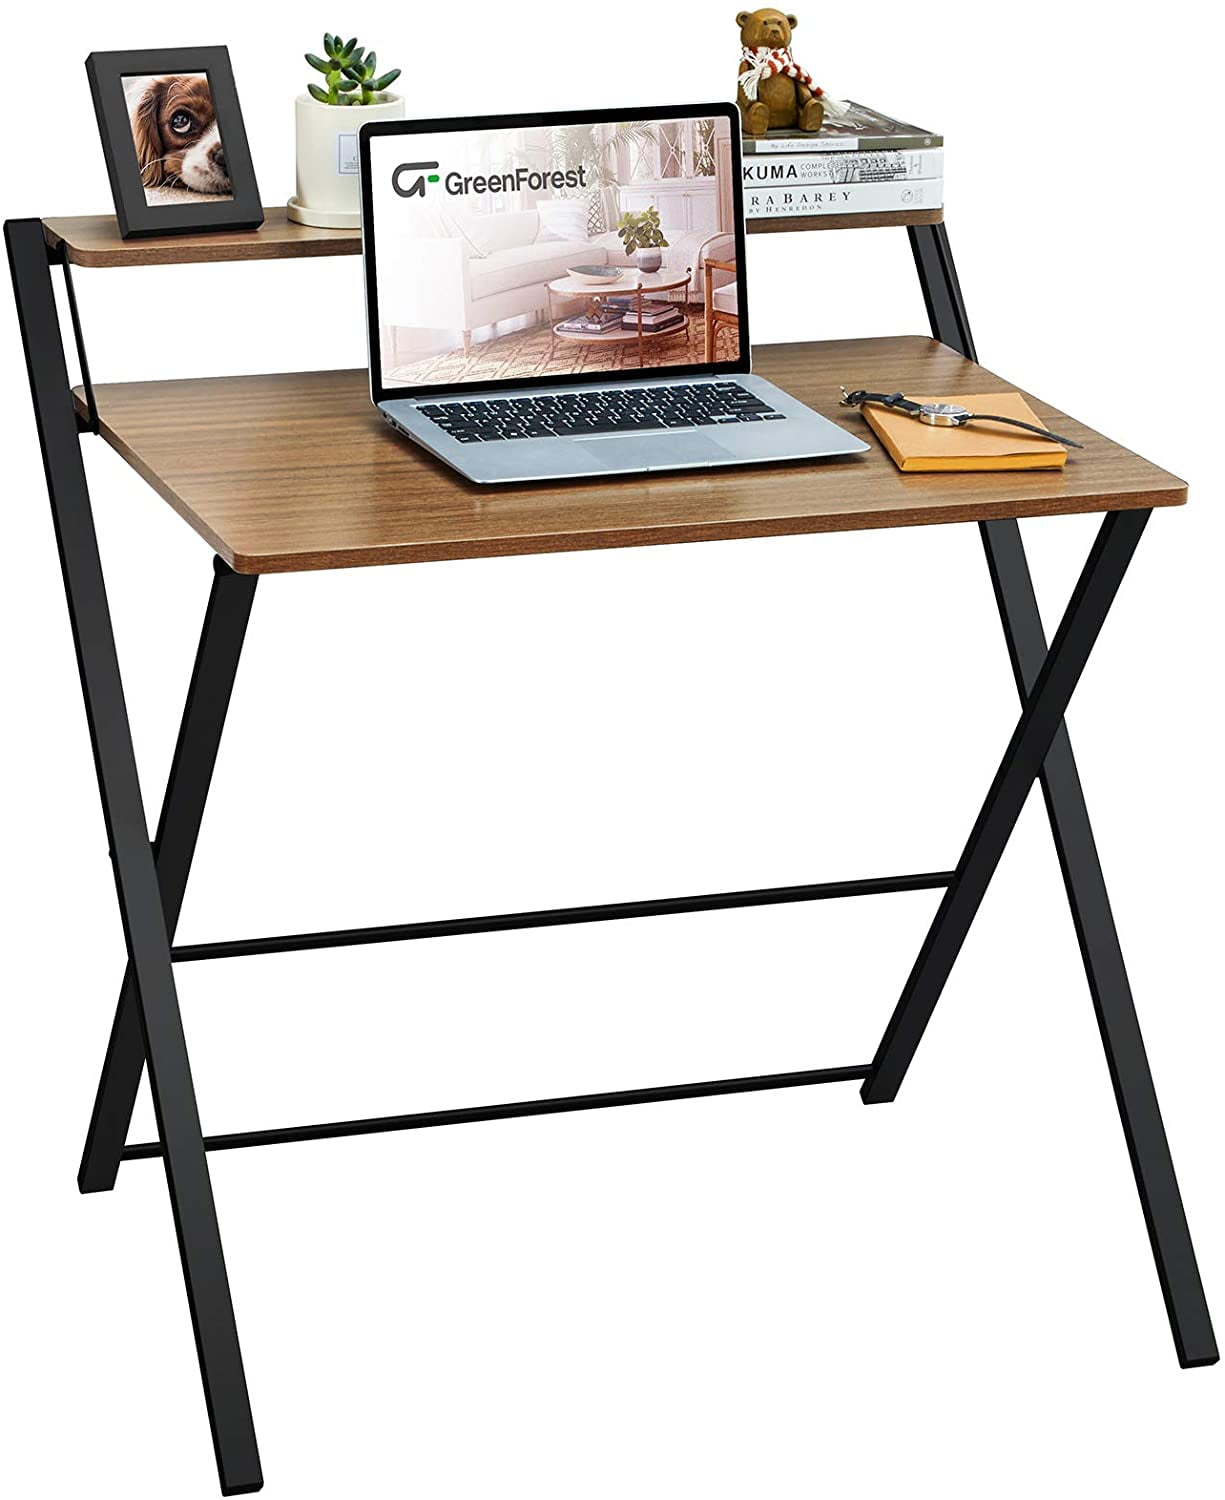 Beige Aingoo Modern Simple Computer Desk Writing Desk Home Office Desk Wooden Desk PC Laptop Desk with Unique R-shaped structure for Small Space ，Easy to assemble